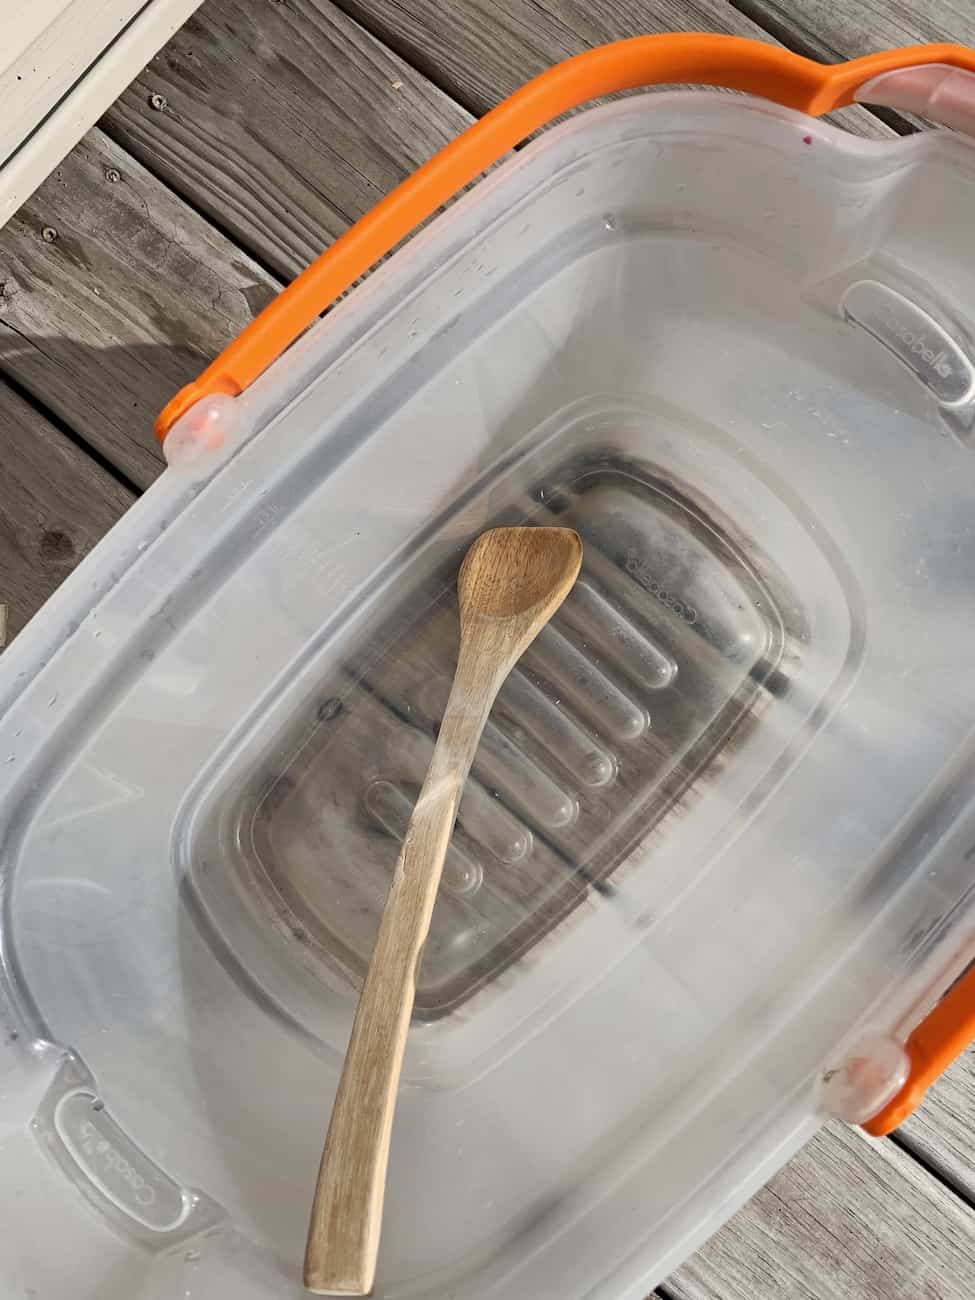 giant bubbles in bucket with wooden spoon for stirring